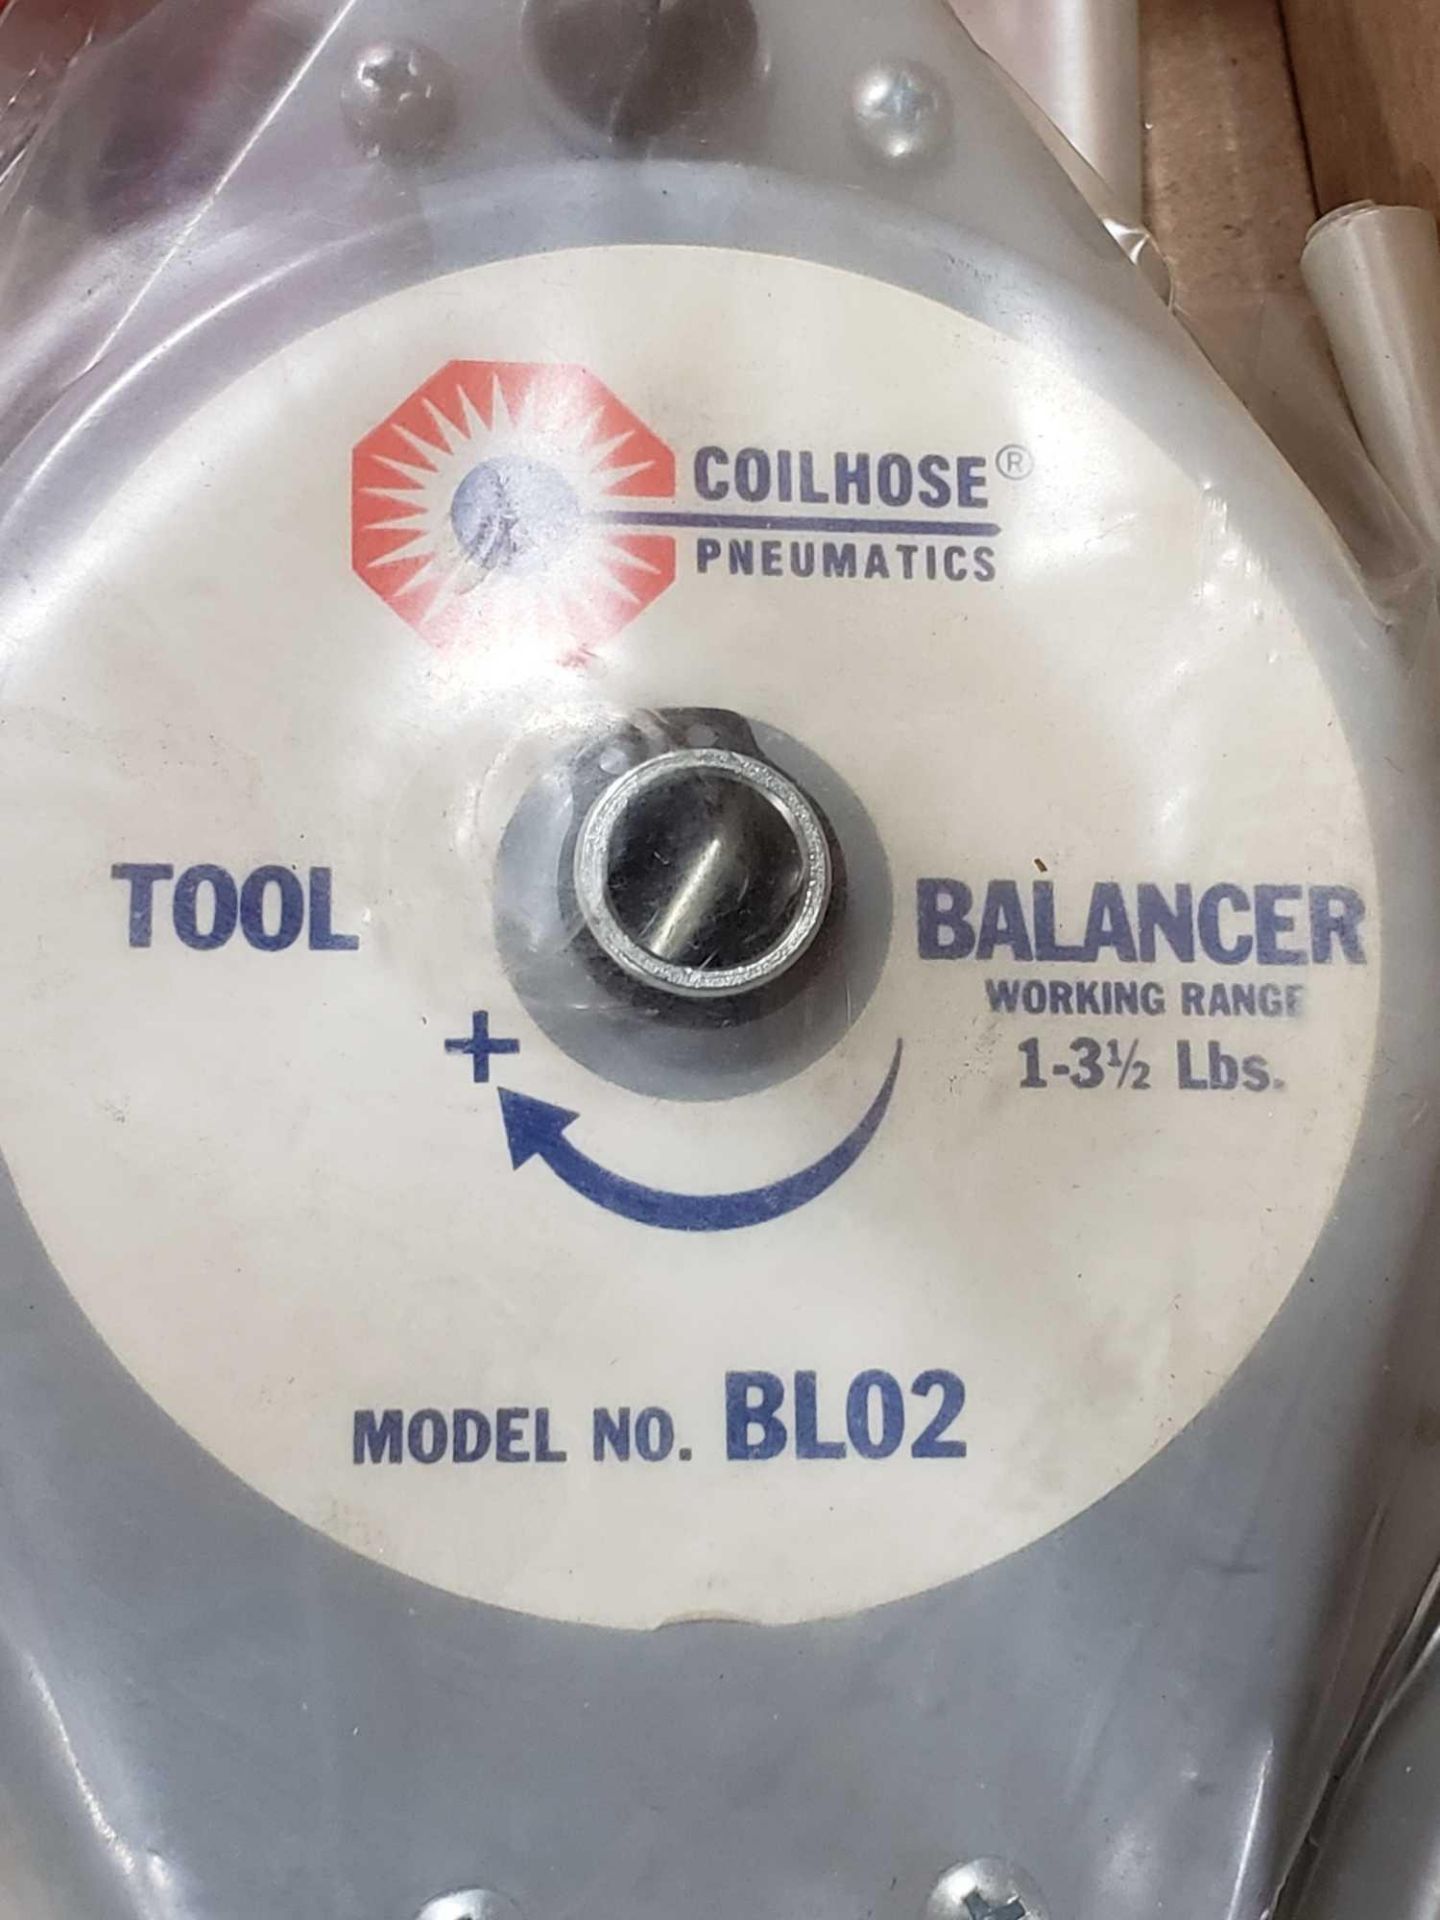 Qty 2 - Coilhouse pneumatics tool balancer. New in plastic. - Image 3 of 3